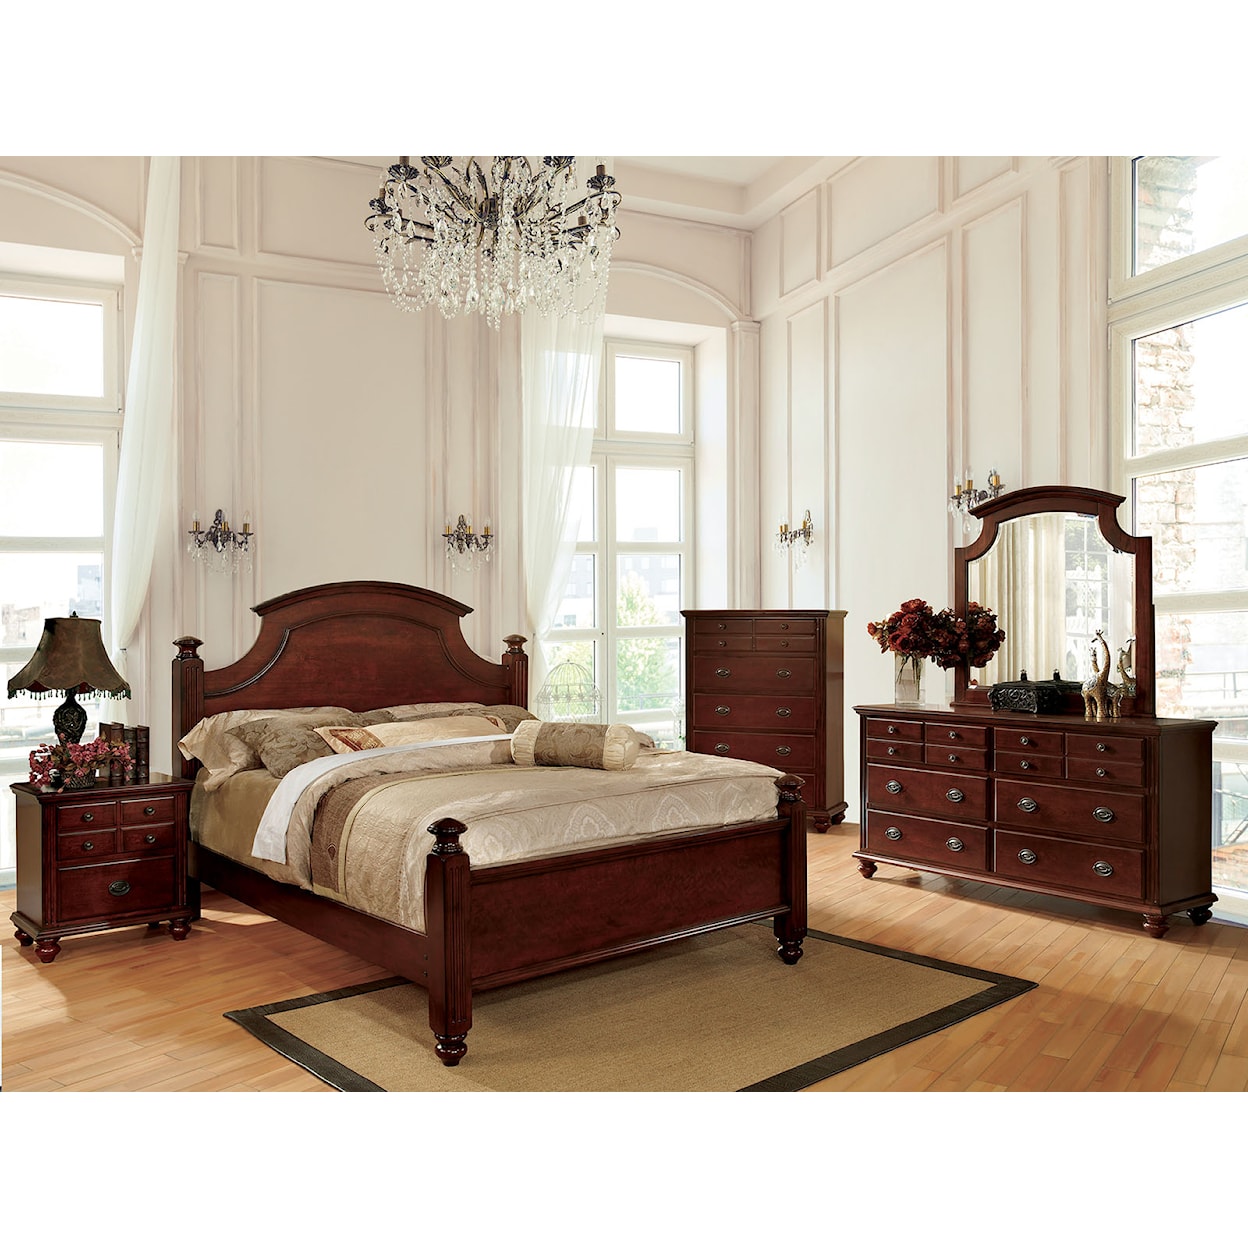 Furniture of America Gabrielle 5 Pc. Queen Bedroom Set w/ 2NS